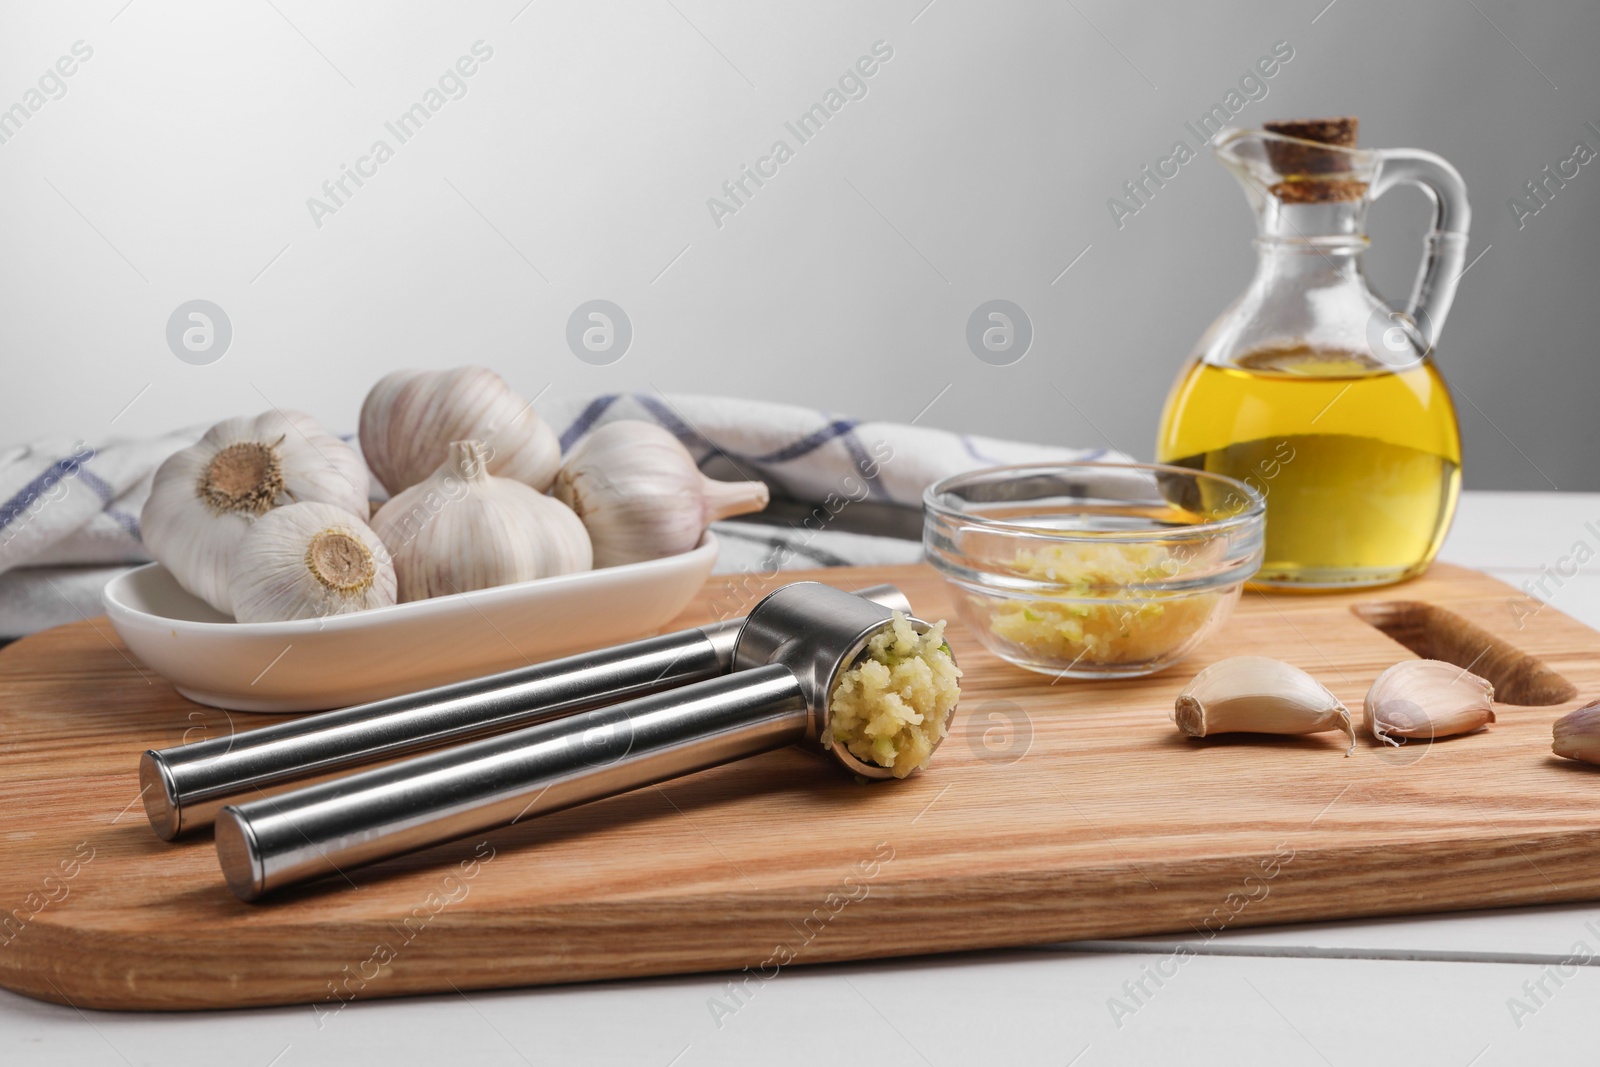 Photo of One metal press and crushed garlic on white wooden table